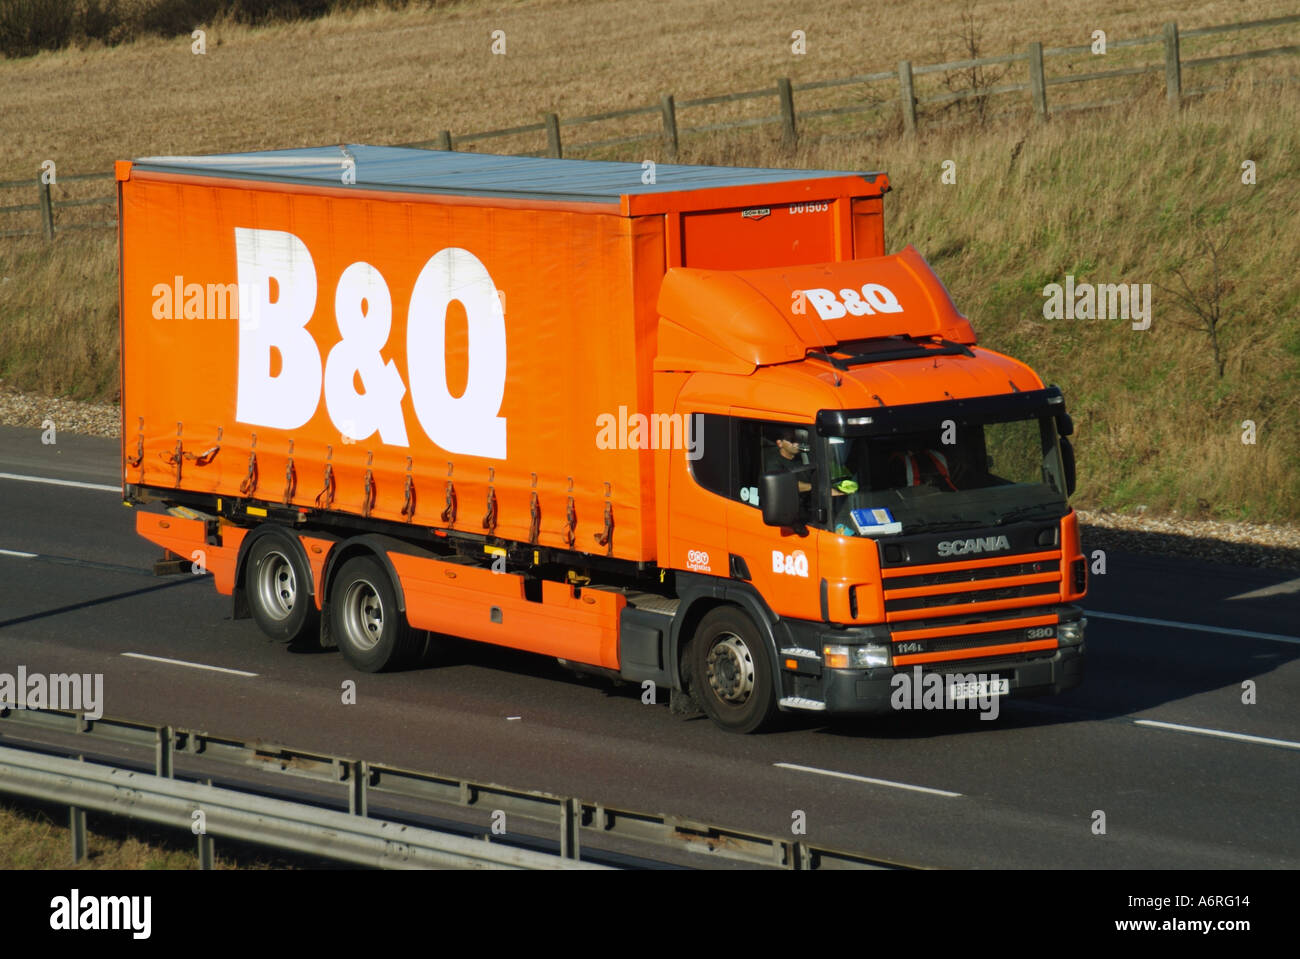 B&Q DIY retail business logo on delivery lorry truck soft side folding easy access curtain raised rear axle for tyre wear economy driving UK motorway Stock Photo